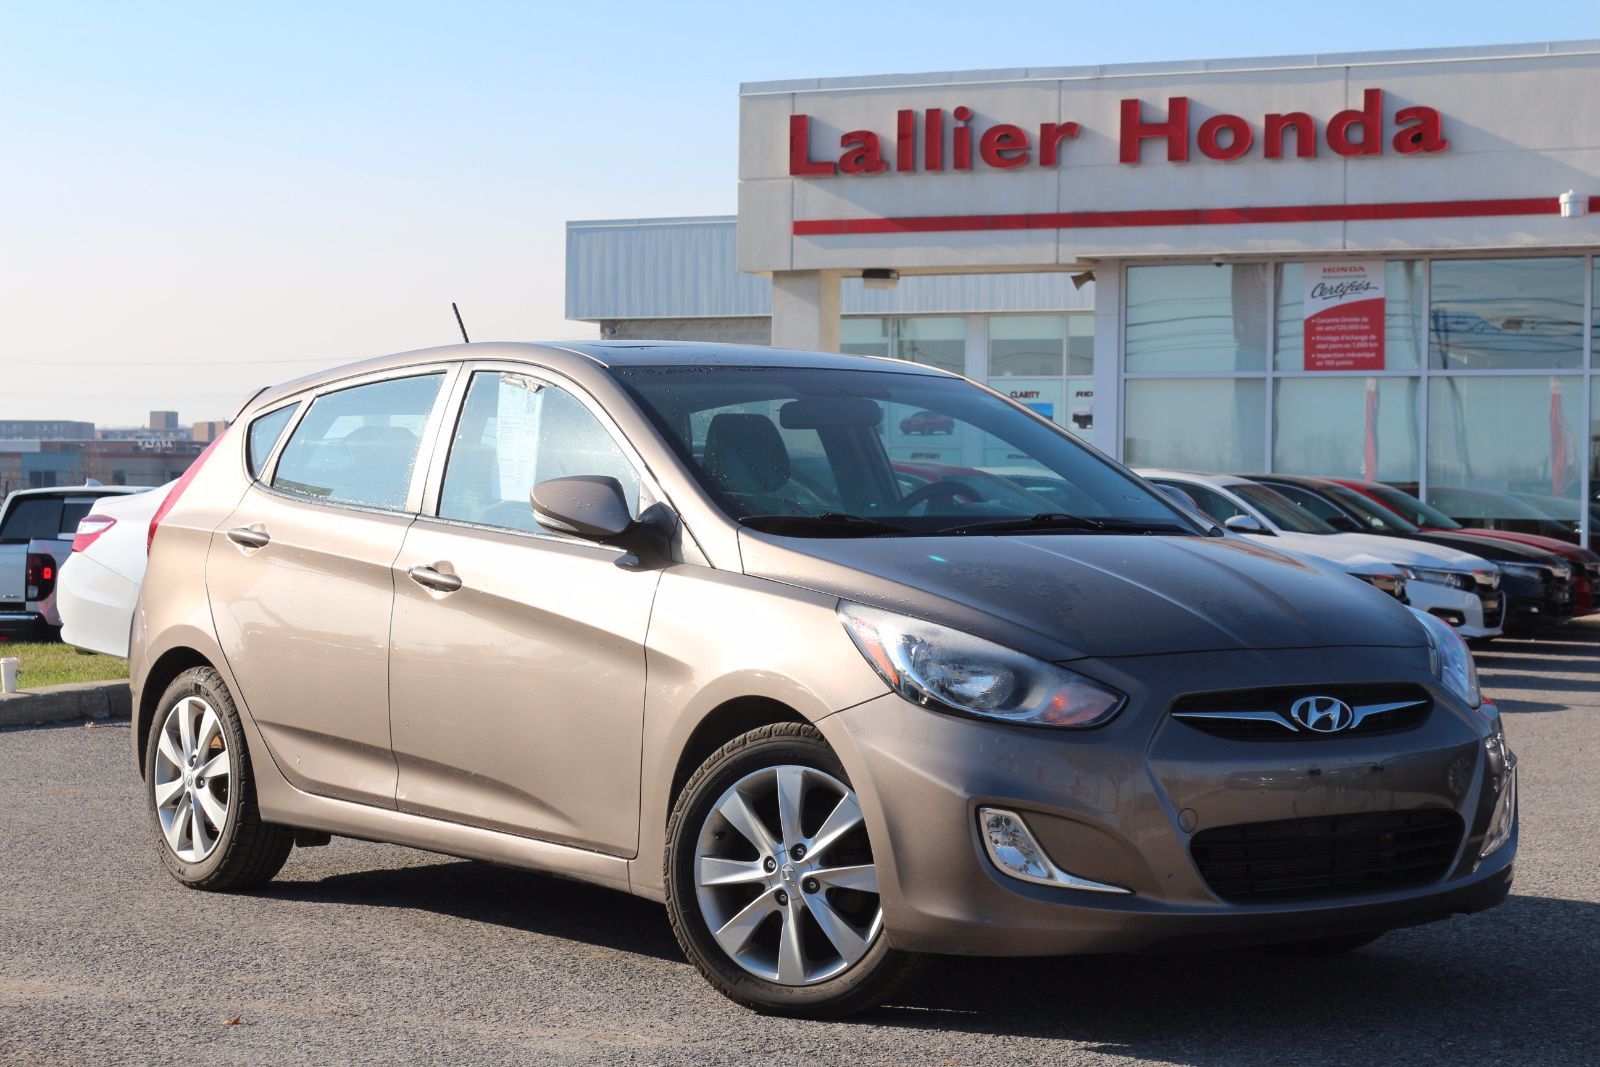 Pre-Owned 2013 Hyundai Accent GLS Lallier Honda Hull in Gatineau